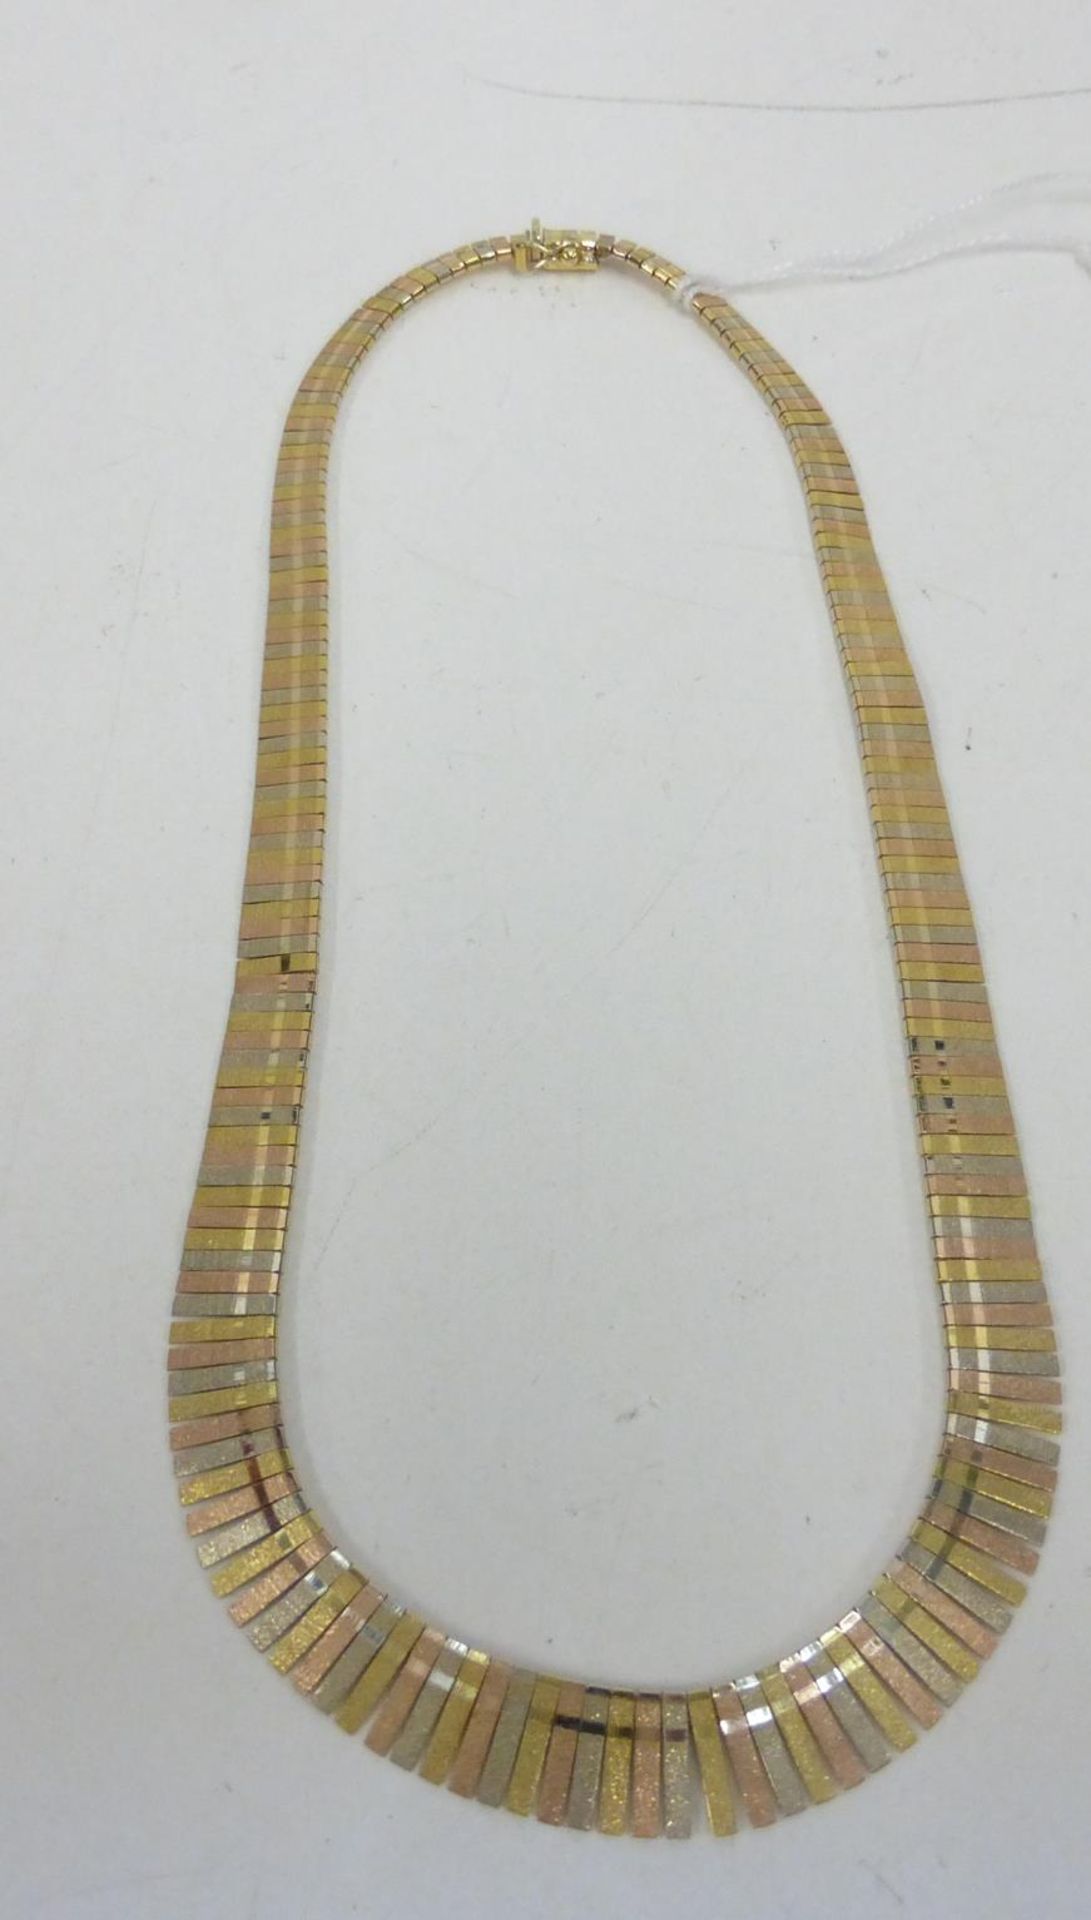 An 18ct Gold tapering with multicolour flexible band Necklet 35gms boxed. (est £700-£900)